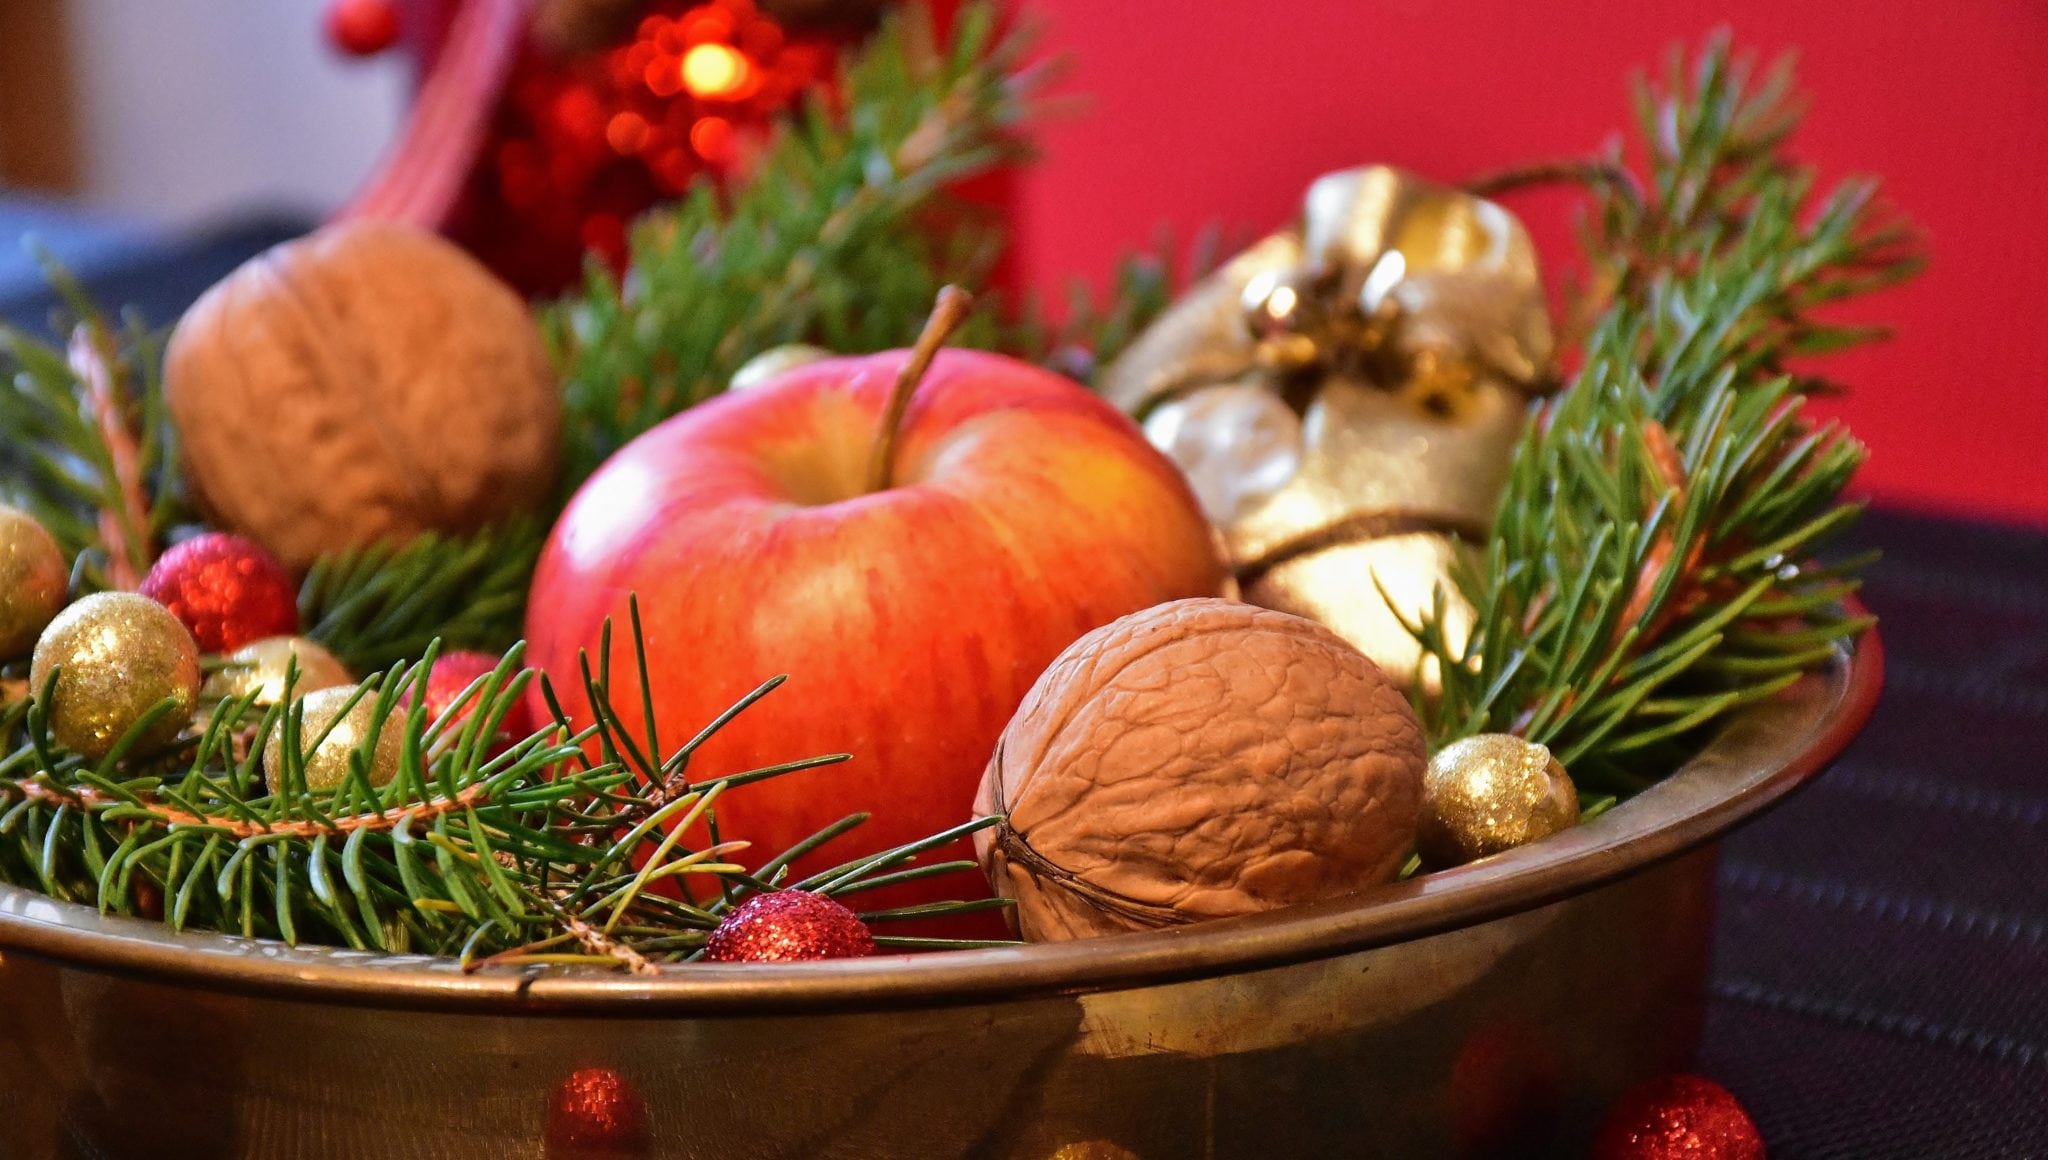 7 Easy Ways to Stay Healthy During the Holidays